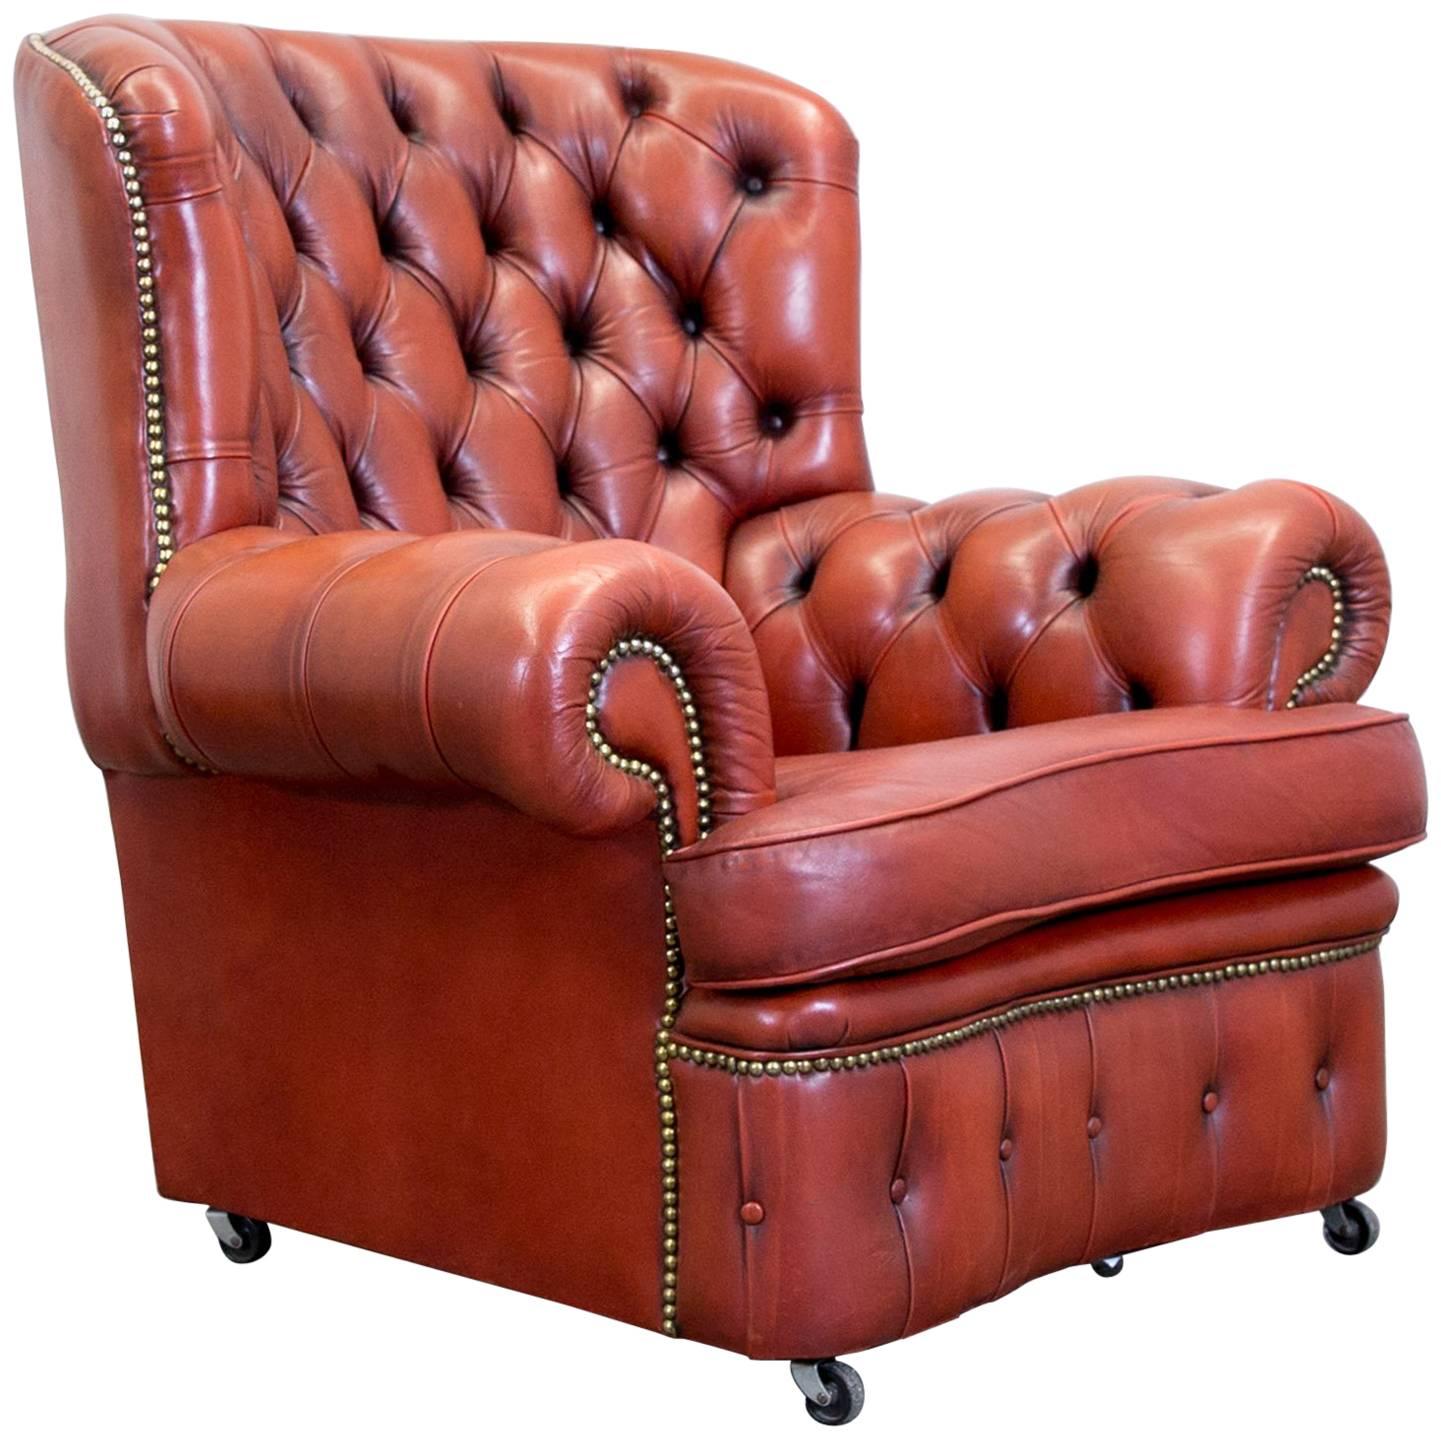 Chesterfield Armchair Leather Brown Orange One-Seat Vintage Retro Rivets For Sale